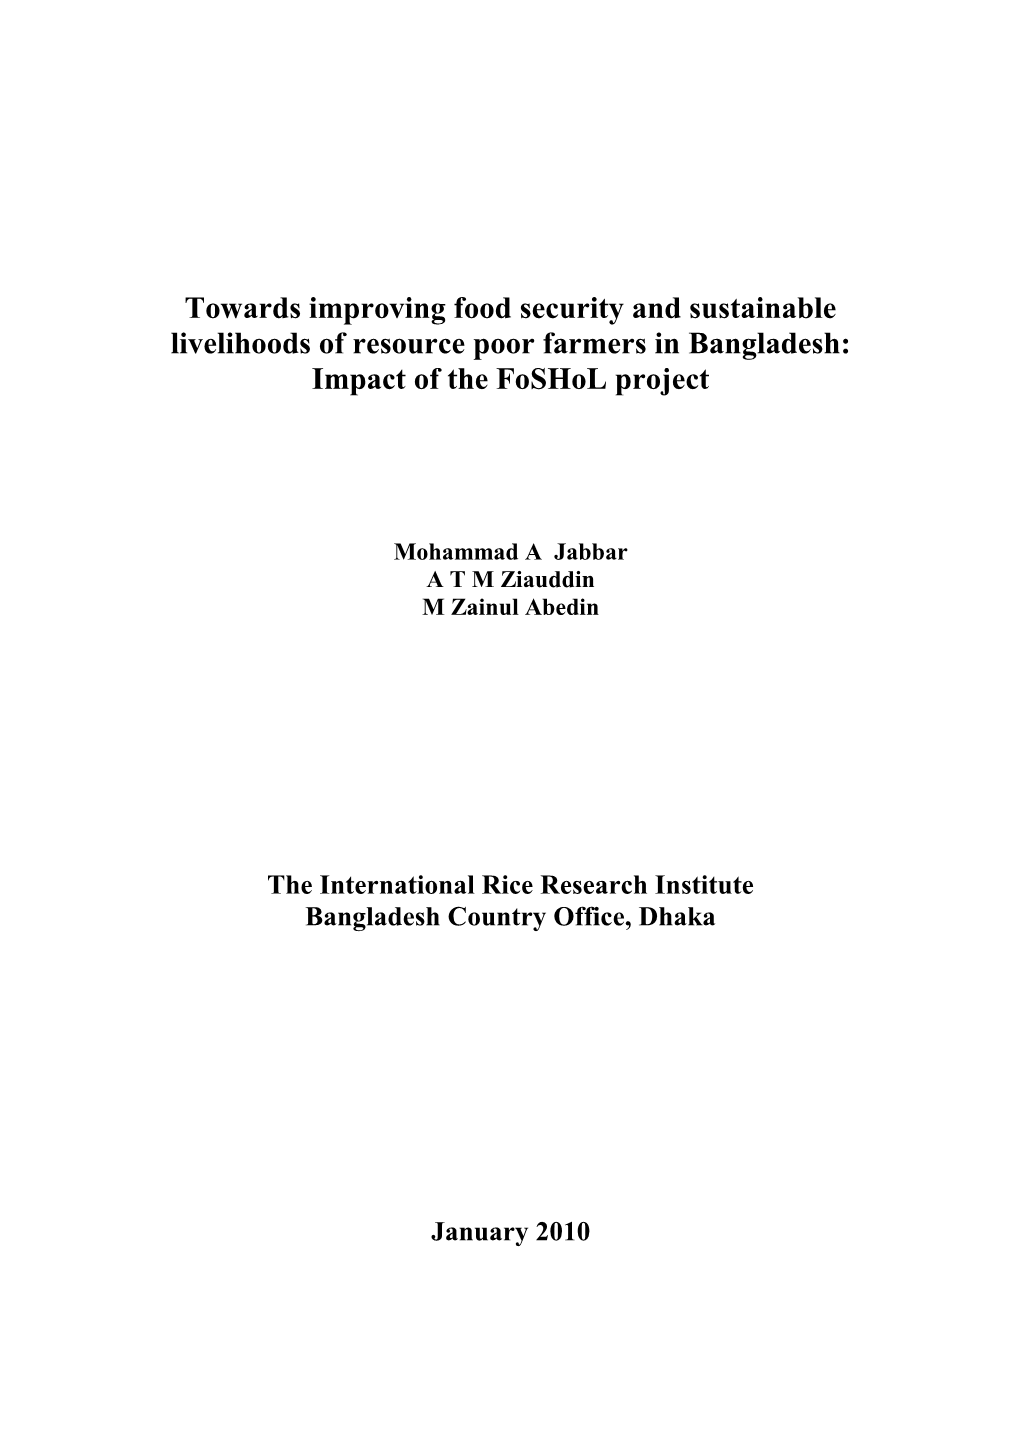 Towards Improving Food Security and Sustainable Livelihoods of Resource Poor Farmers in Bangladesh : Impact of the Foshol Projec